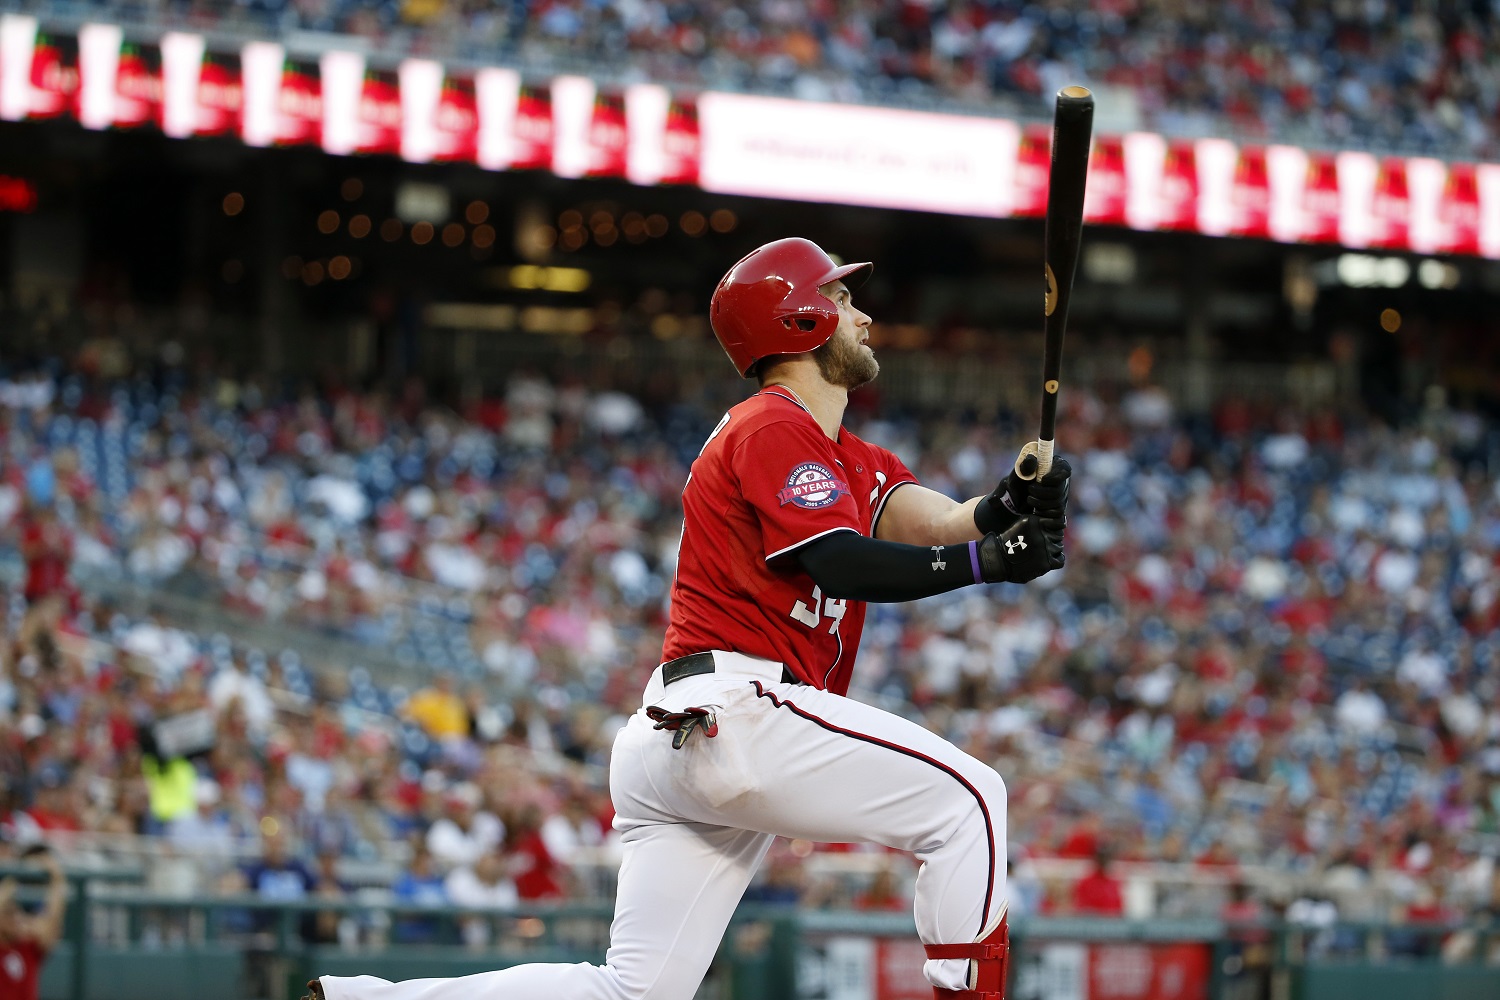 Washington Nationals' Bryce Harper watches his two-run homer during the seventh inning of a baseball game against the Miami Marlins at Nationals Park, Saturday, Sept. 19, 2015, in Washington. The Nationals won 5-2. (AP Photo/Alex Brandon)